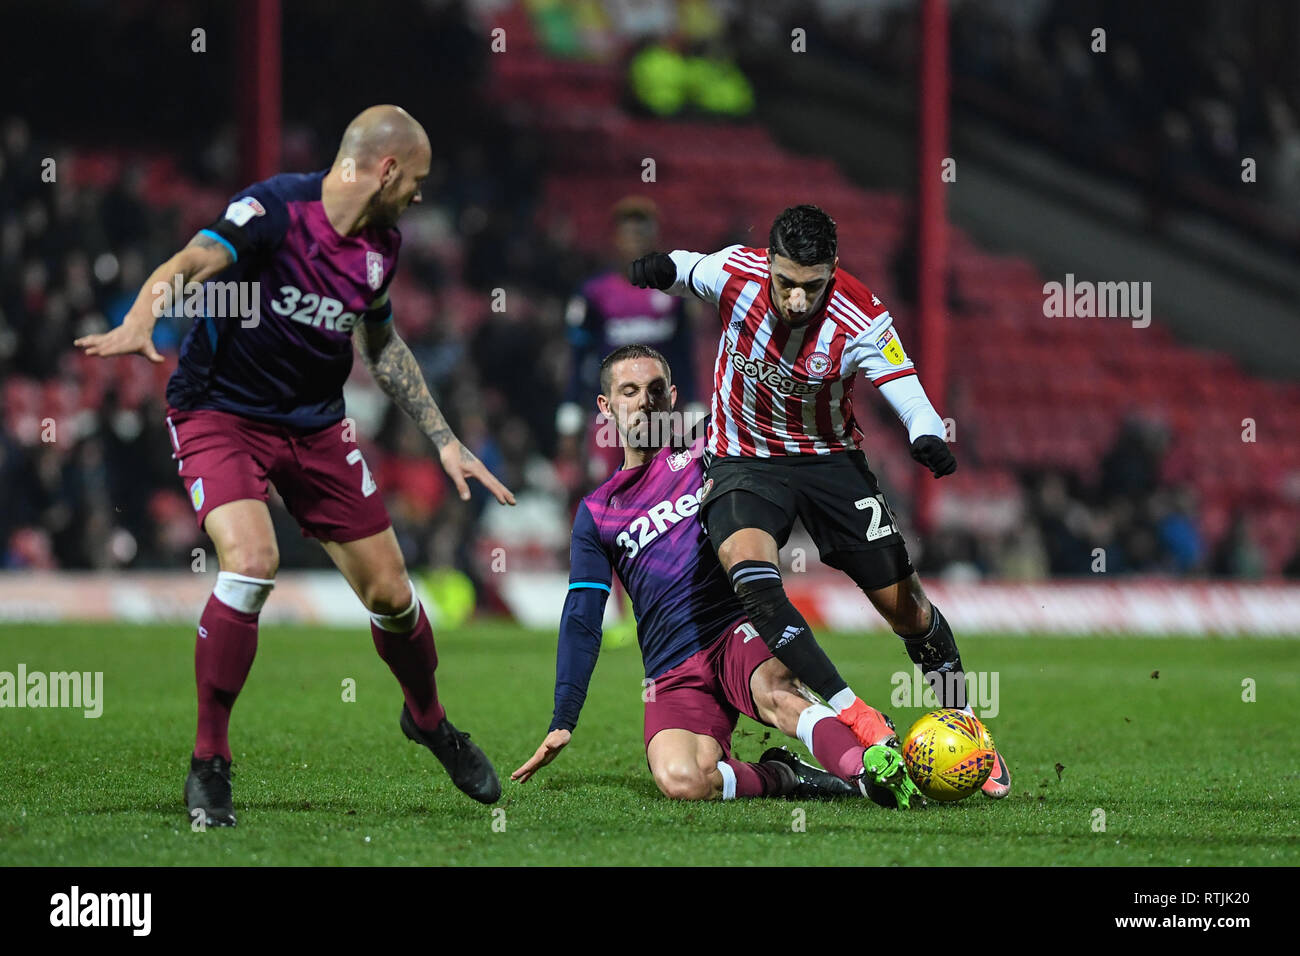 13th February 2019, Griffin Park, London, England; Sky Bet Championship, Brentford vs Aston Villa ; Saïd Benrahma (21) of Brentford is slide tackled  Credit: Phil Westlake/News Images,  English Football League images are subject to DataCo Licence Stock Photo